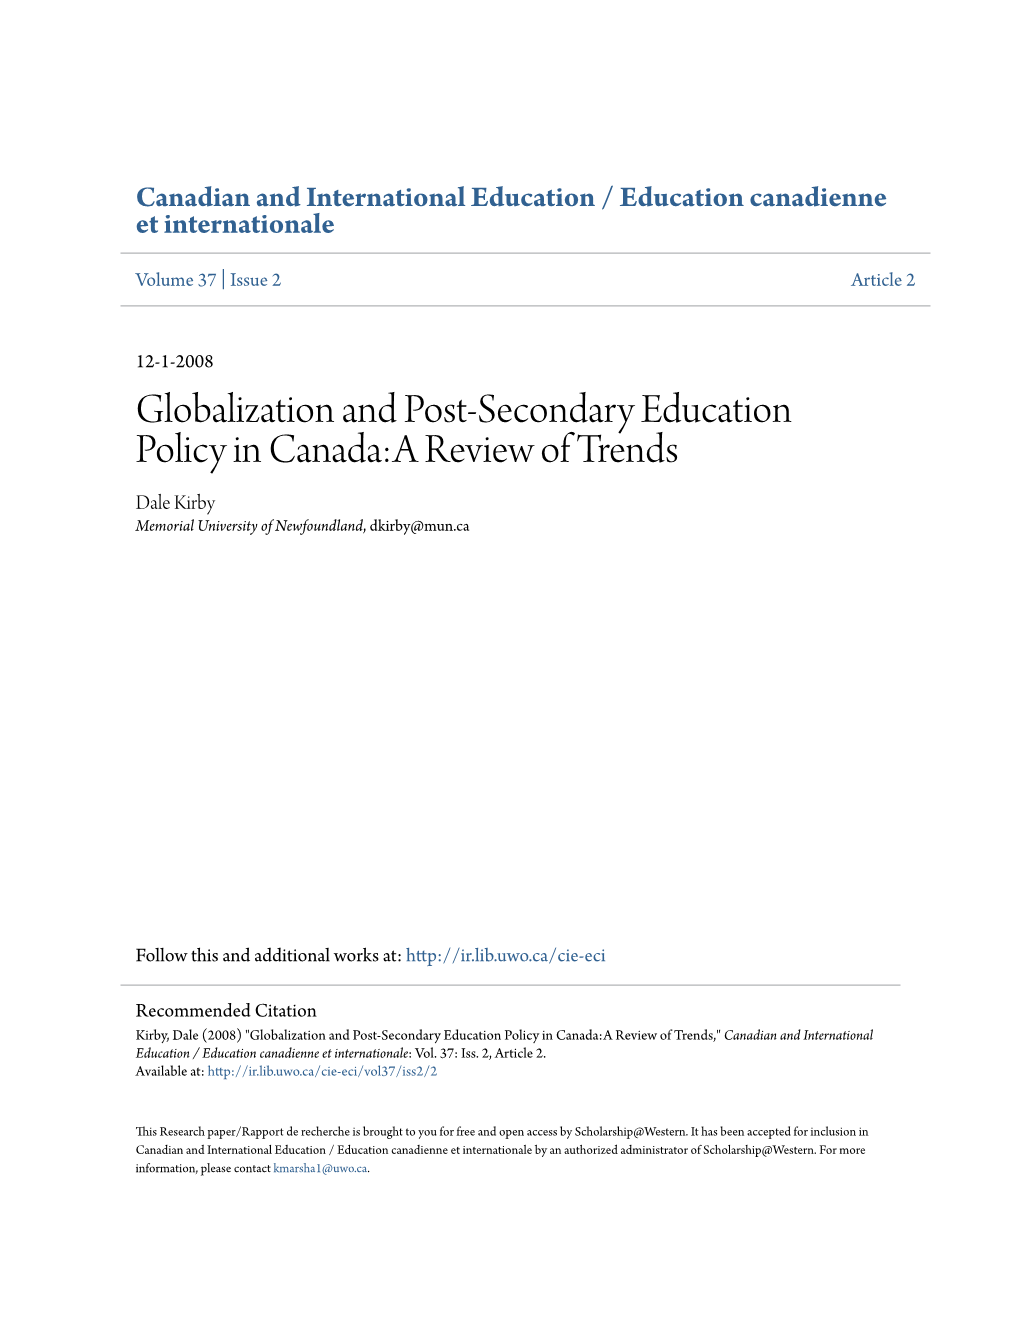 Globalization and Post-Secondary Education Policy in Canada:A Review of Trends Dale Kirby Memorial University of Newfoundland, Dkirby@Mun.Ca